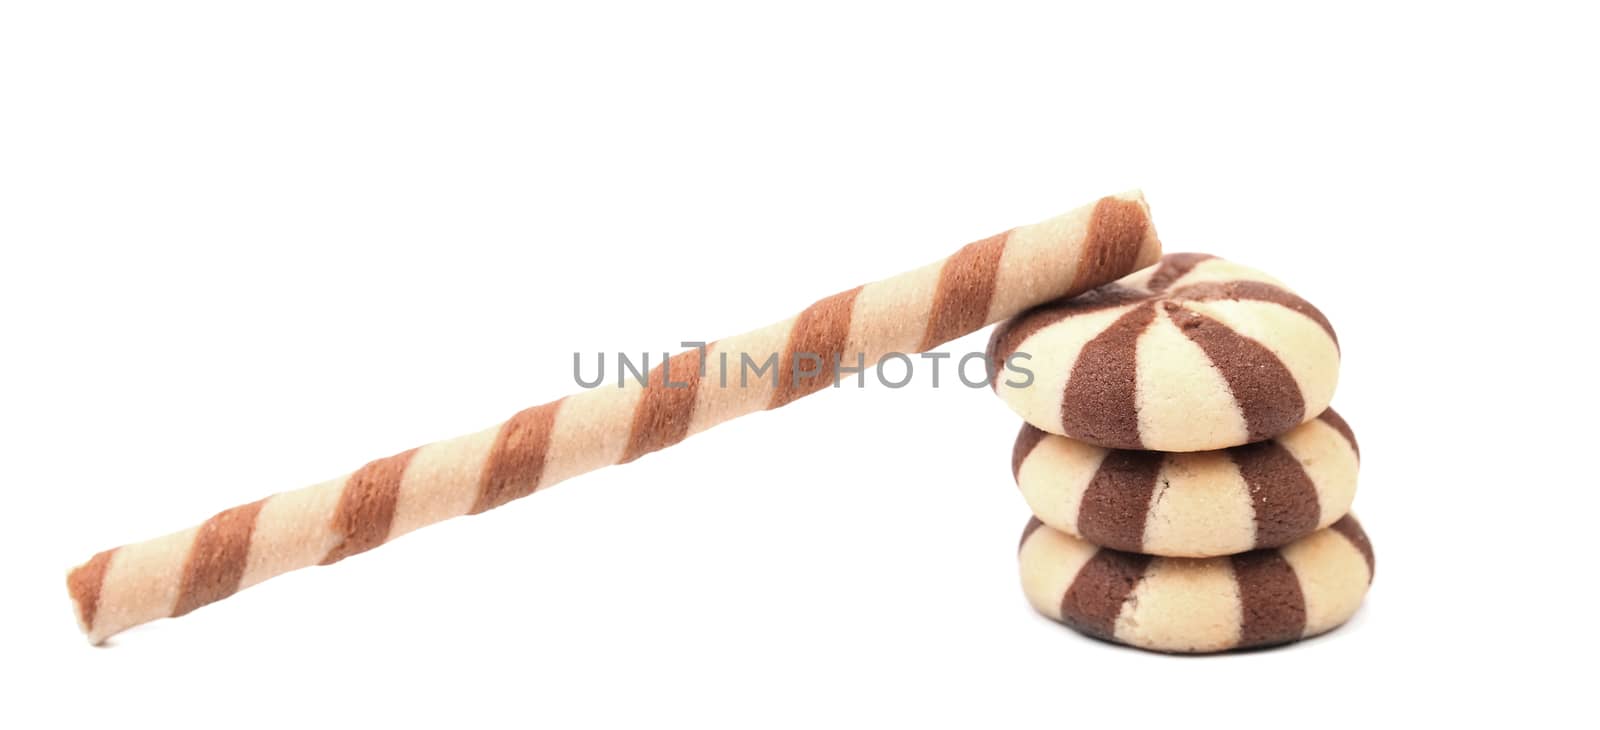 Chocolate swafer rolls and stake biscuits. Isolated on a white background.